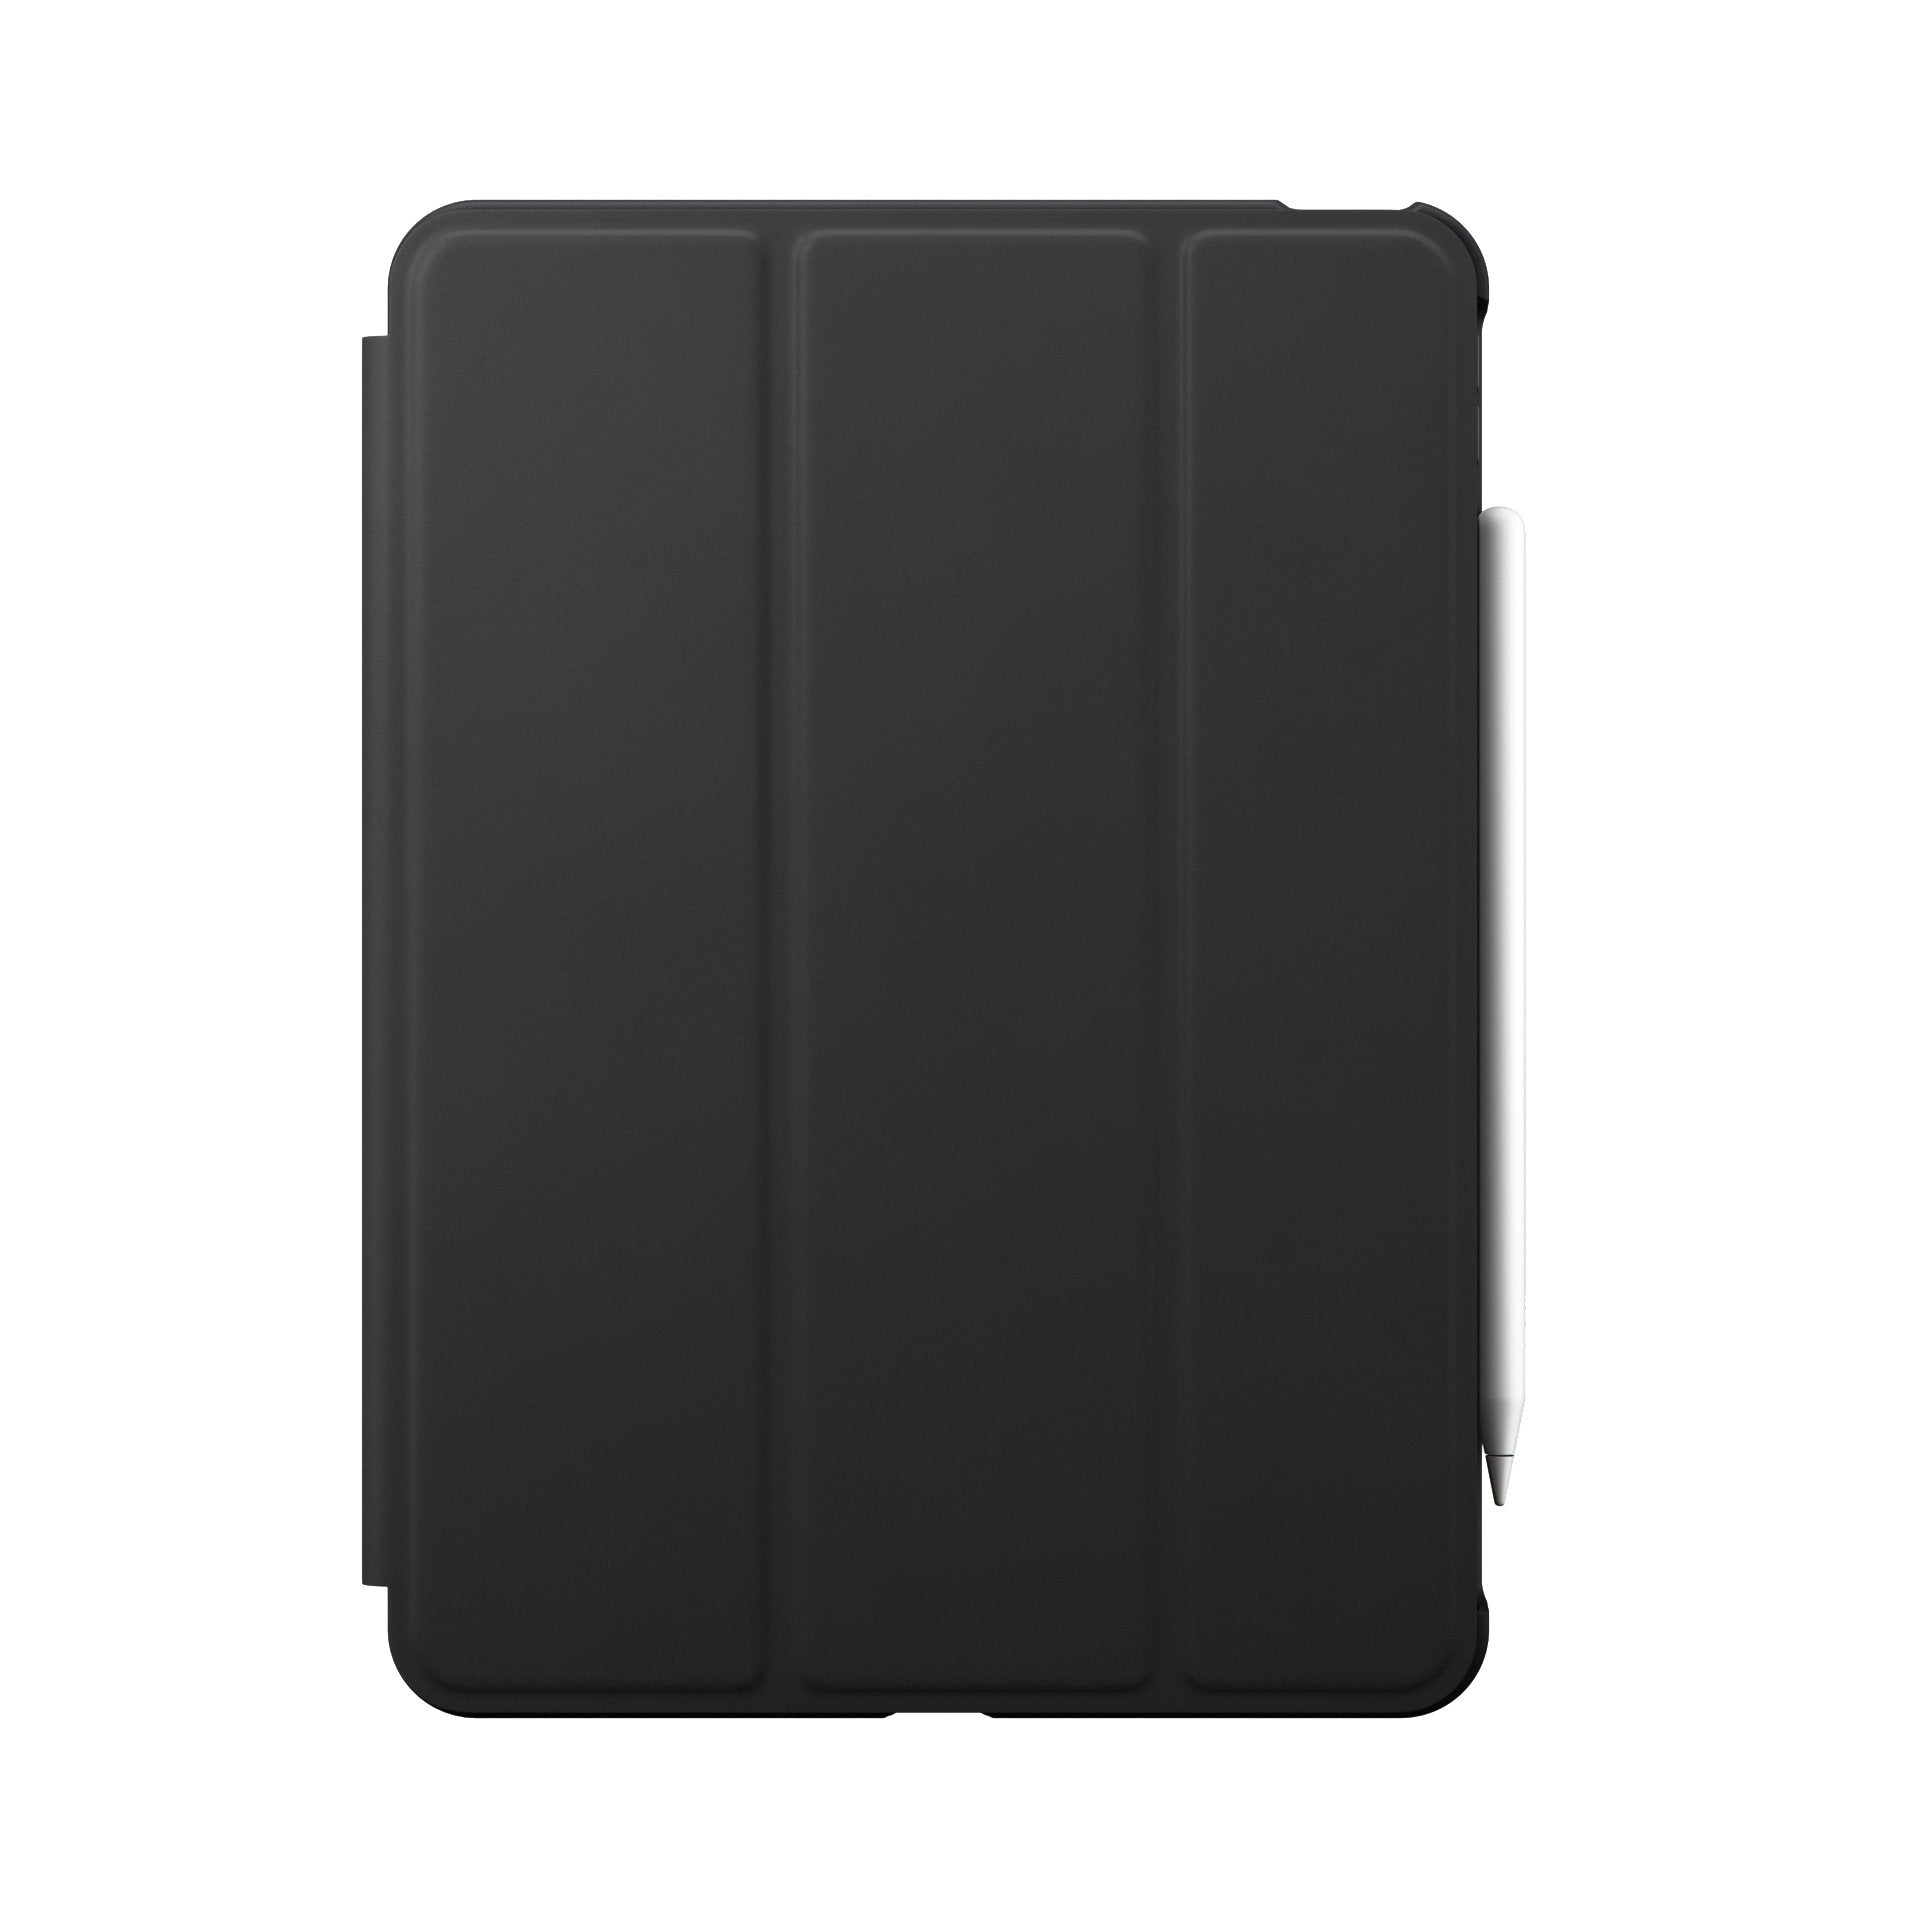 NOMAD Rugged Folio PU Leather Case for iPad Air 4th 10.9"(2020), Gray Default NOMAD 